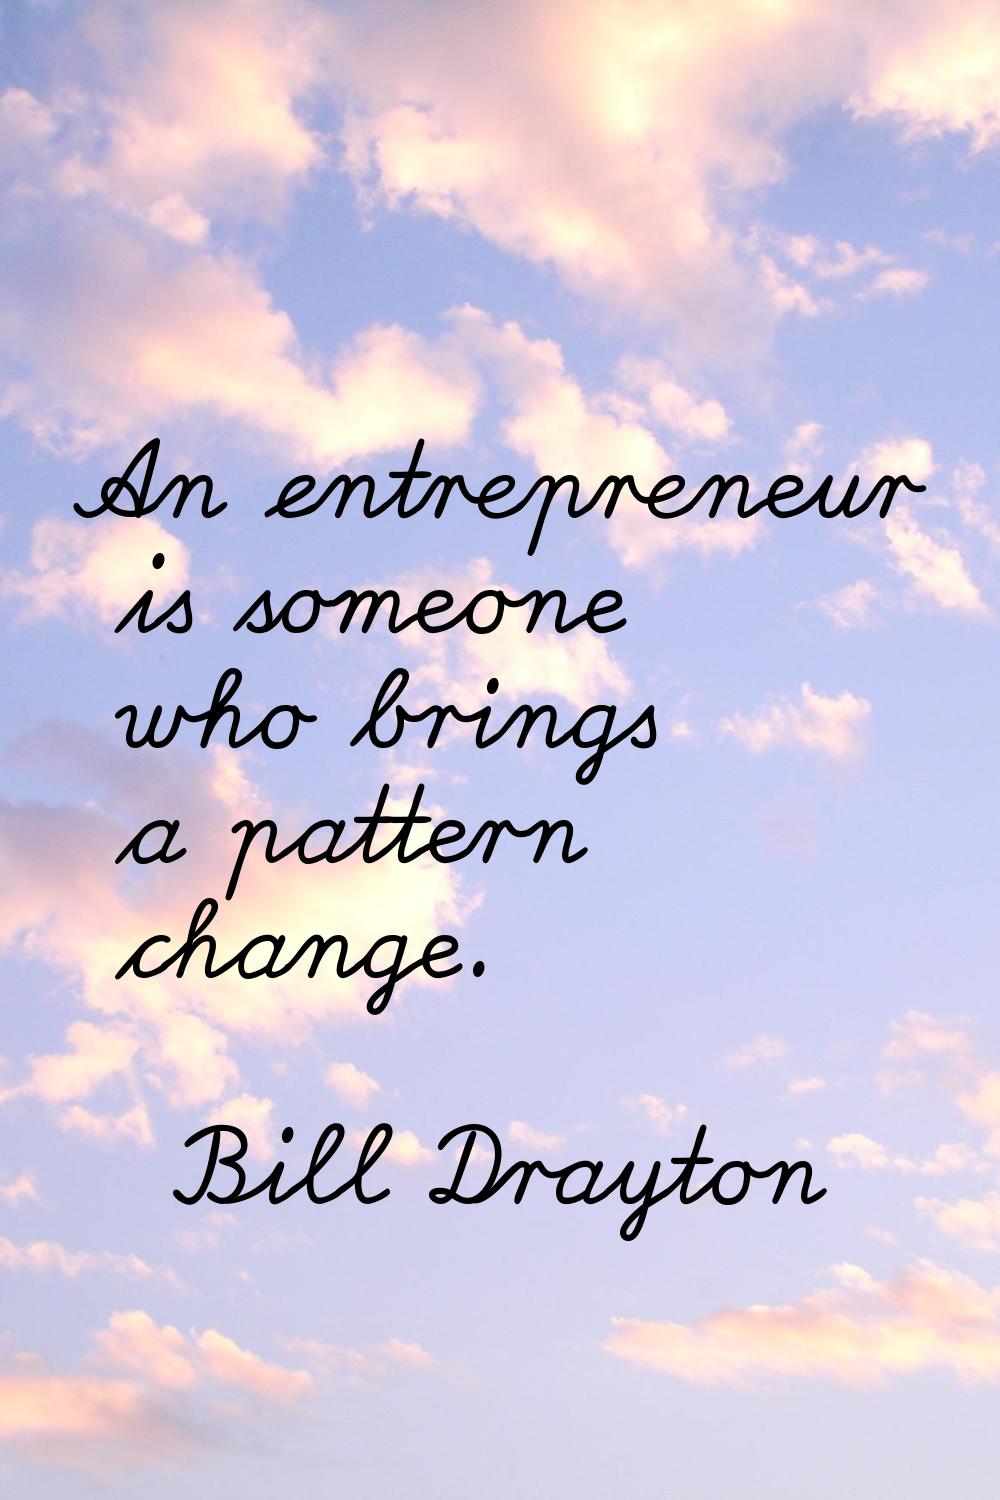 An entrepreneur is someone who brings a pattern change.